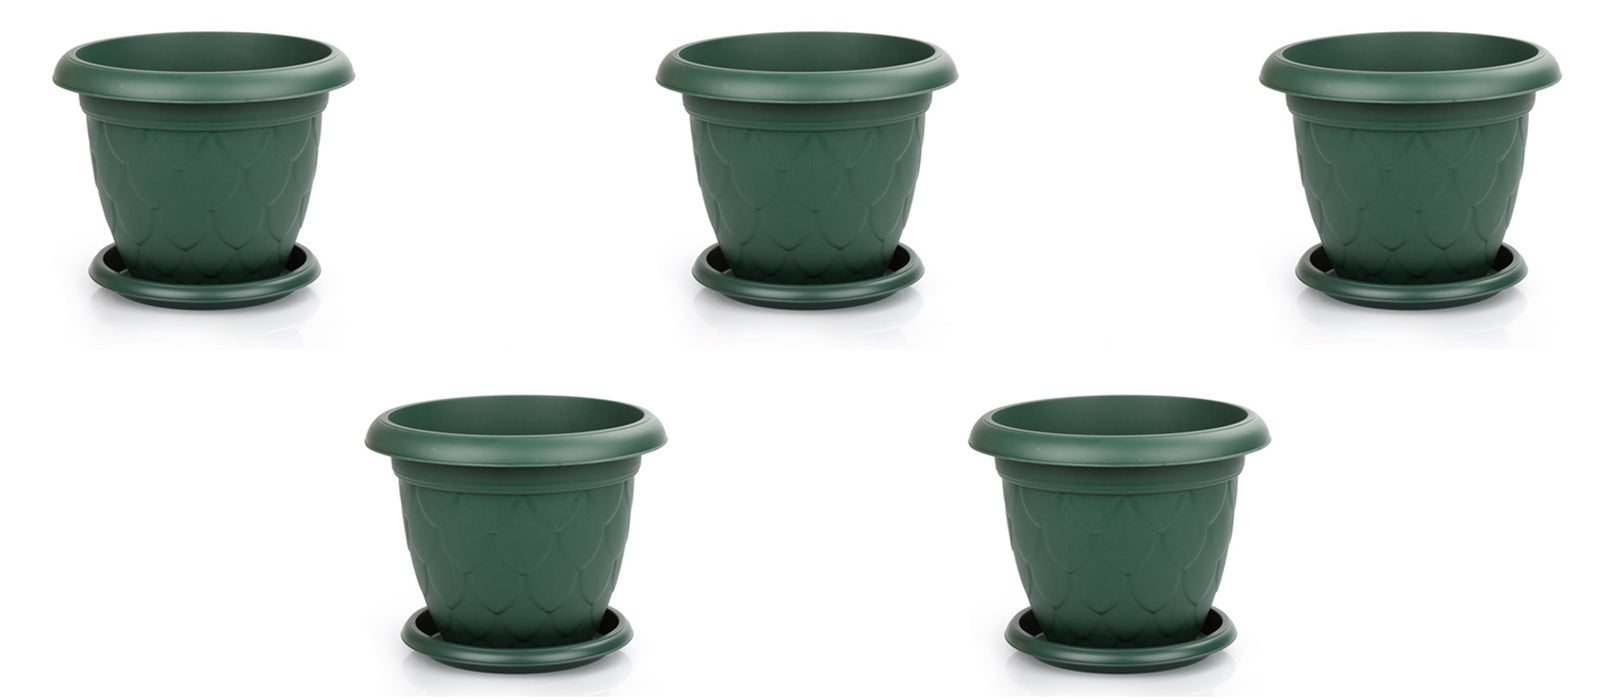 Plastic Round Flower Pot and Saucer. Waterdrop Decor In/Out Planter Plant Pot.